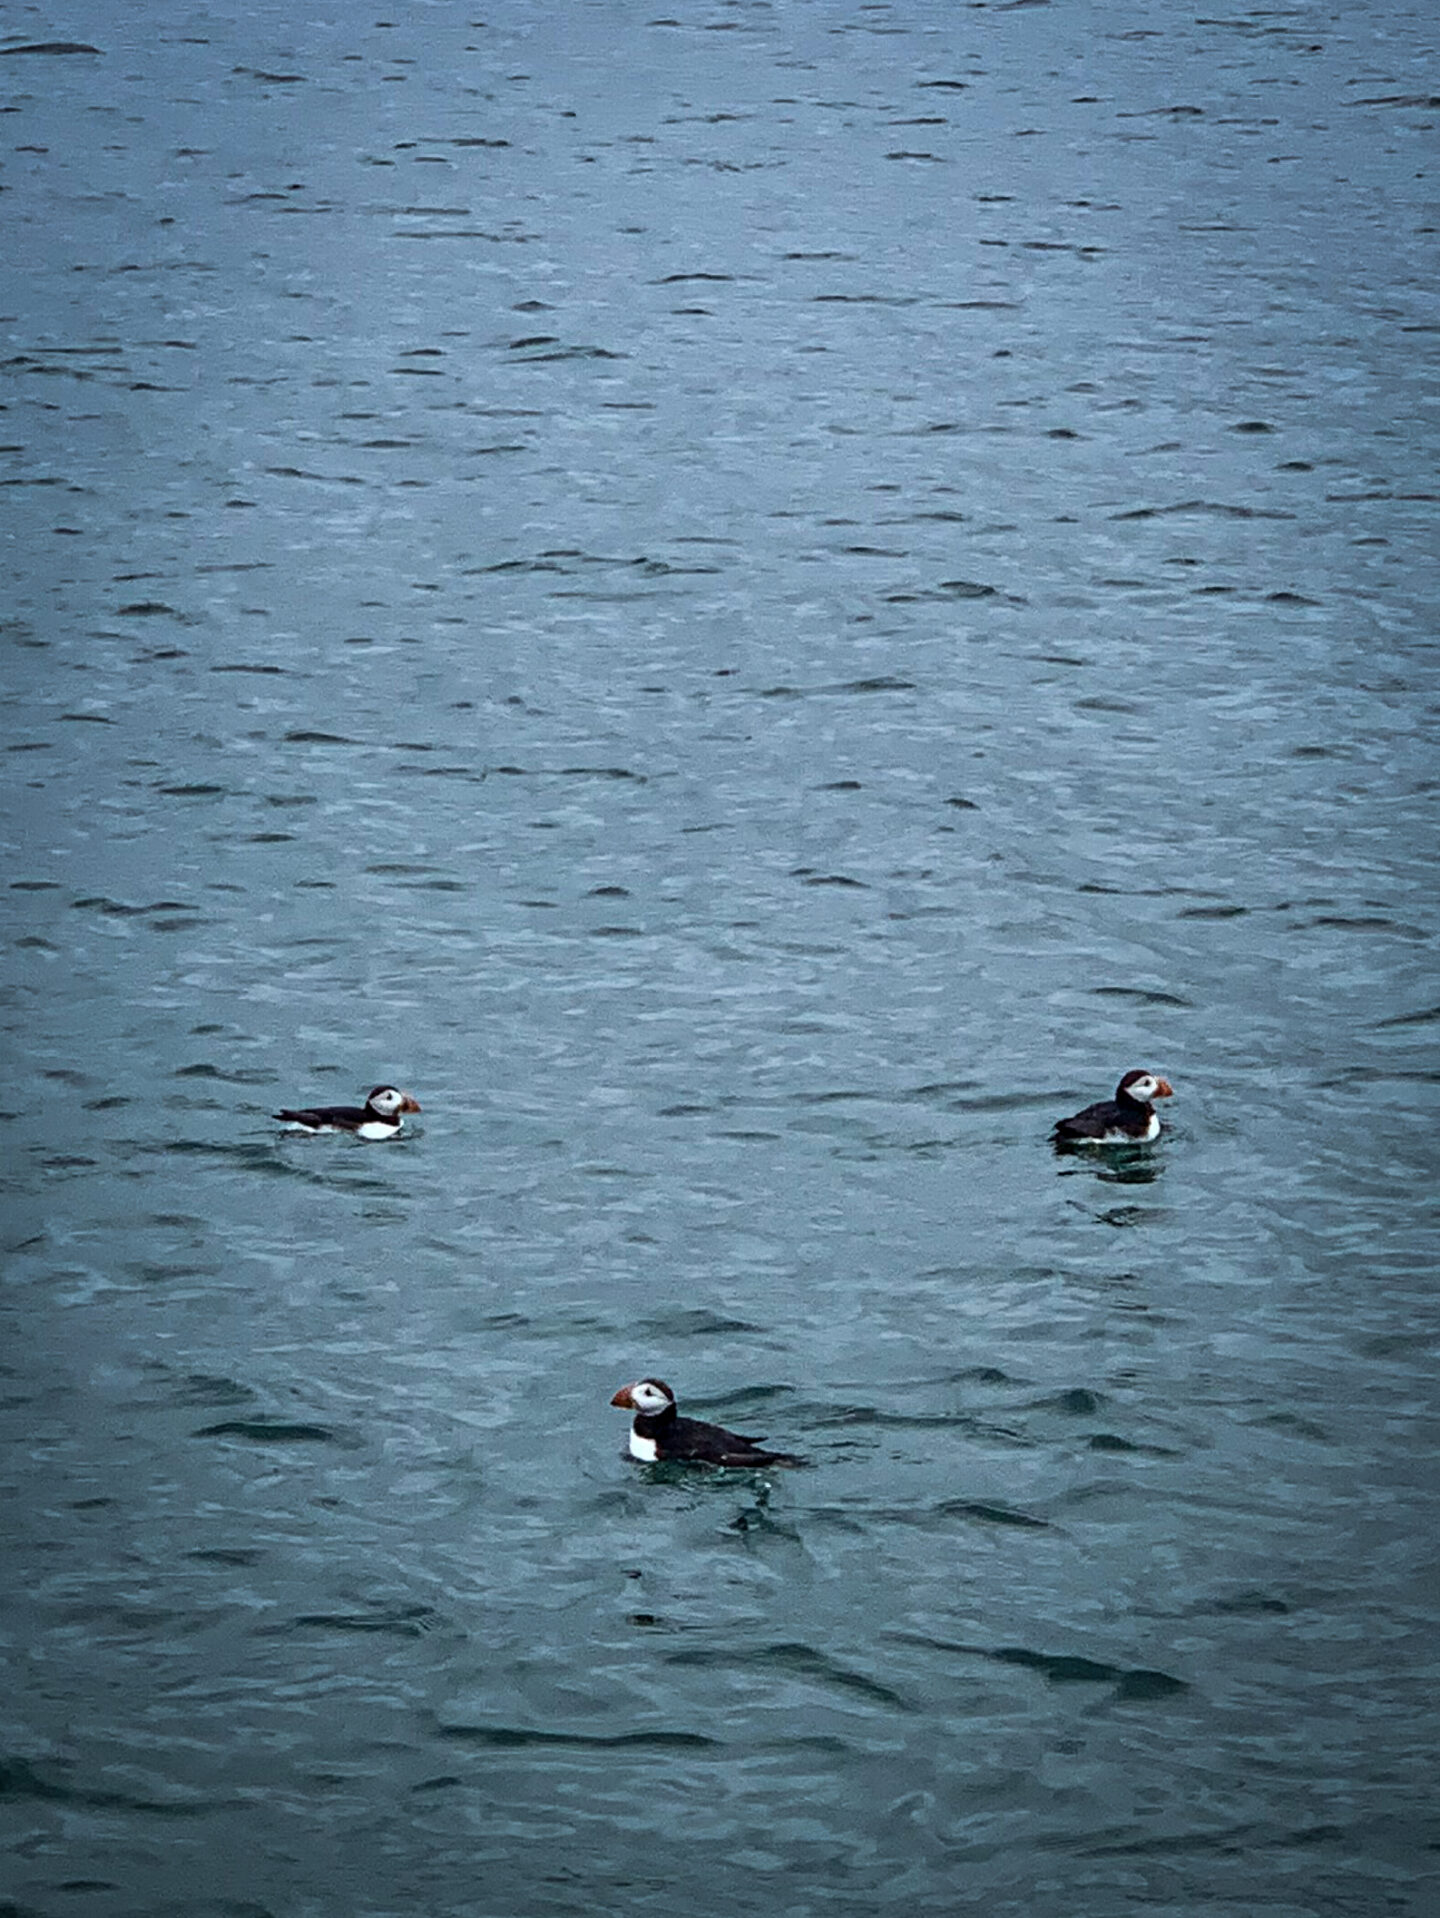 3 puffins bobbing on the cold blue waters of the north sea. 